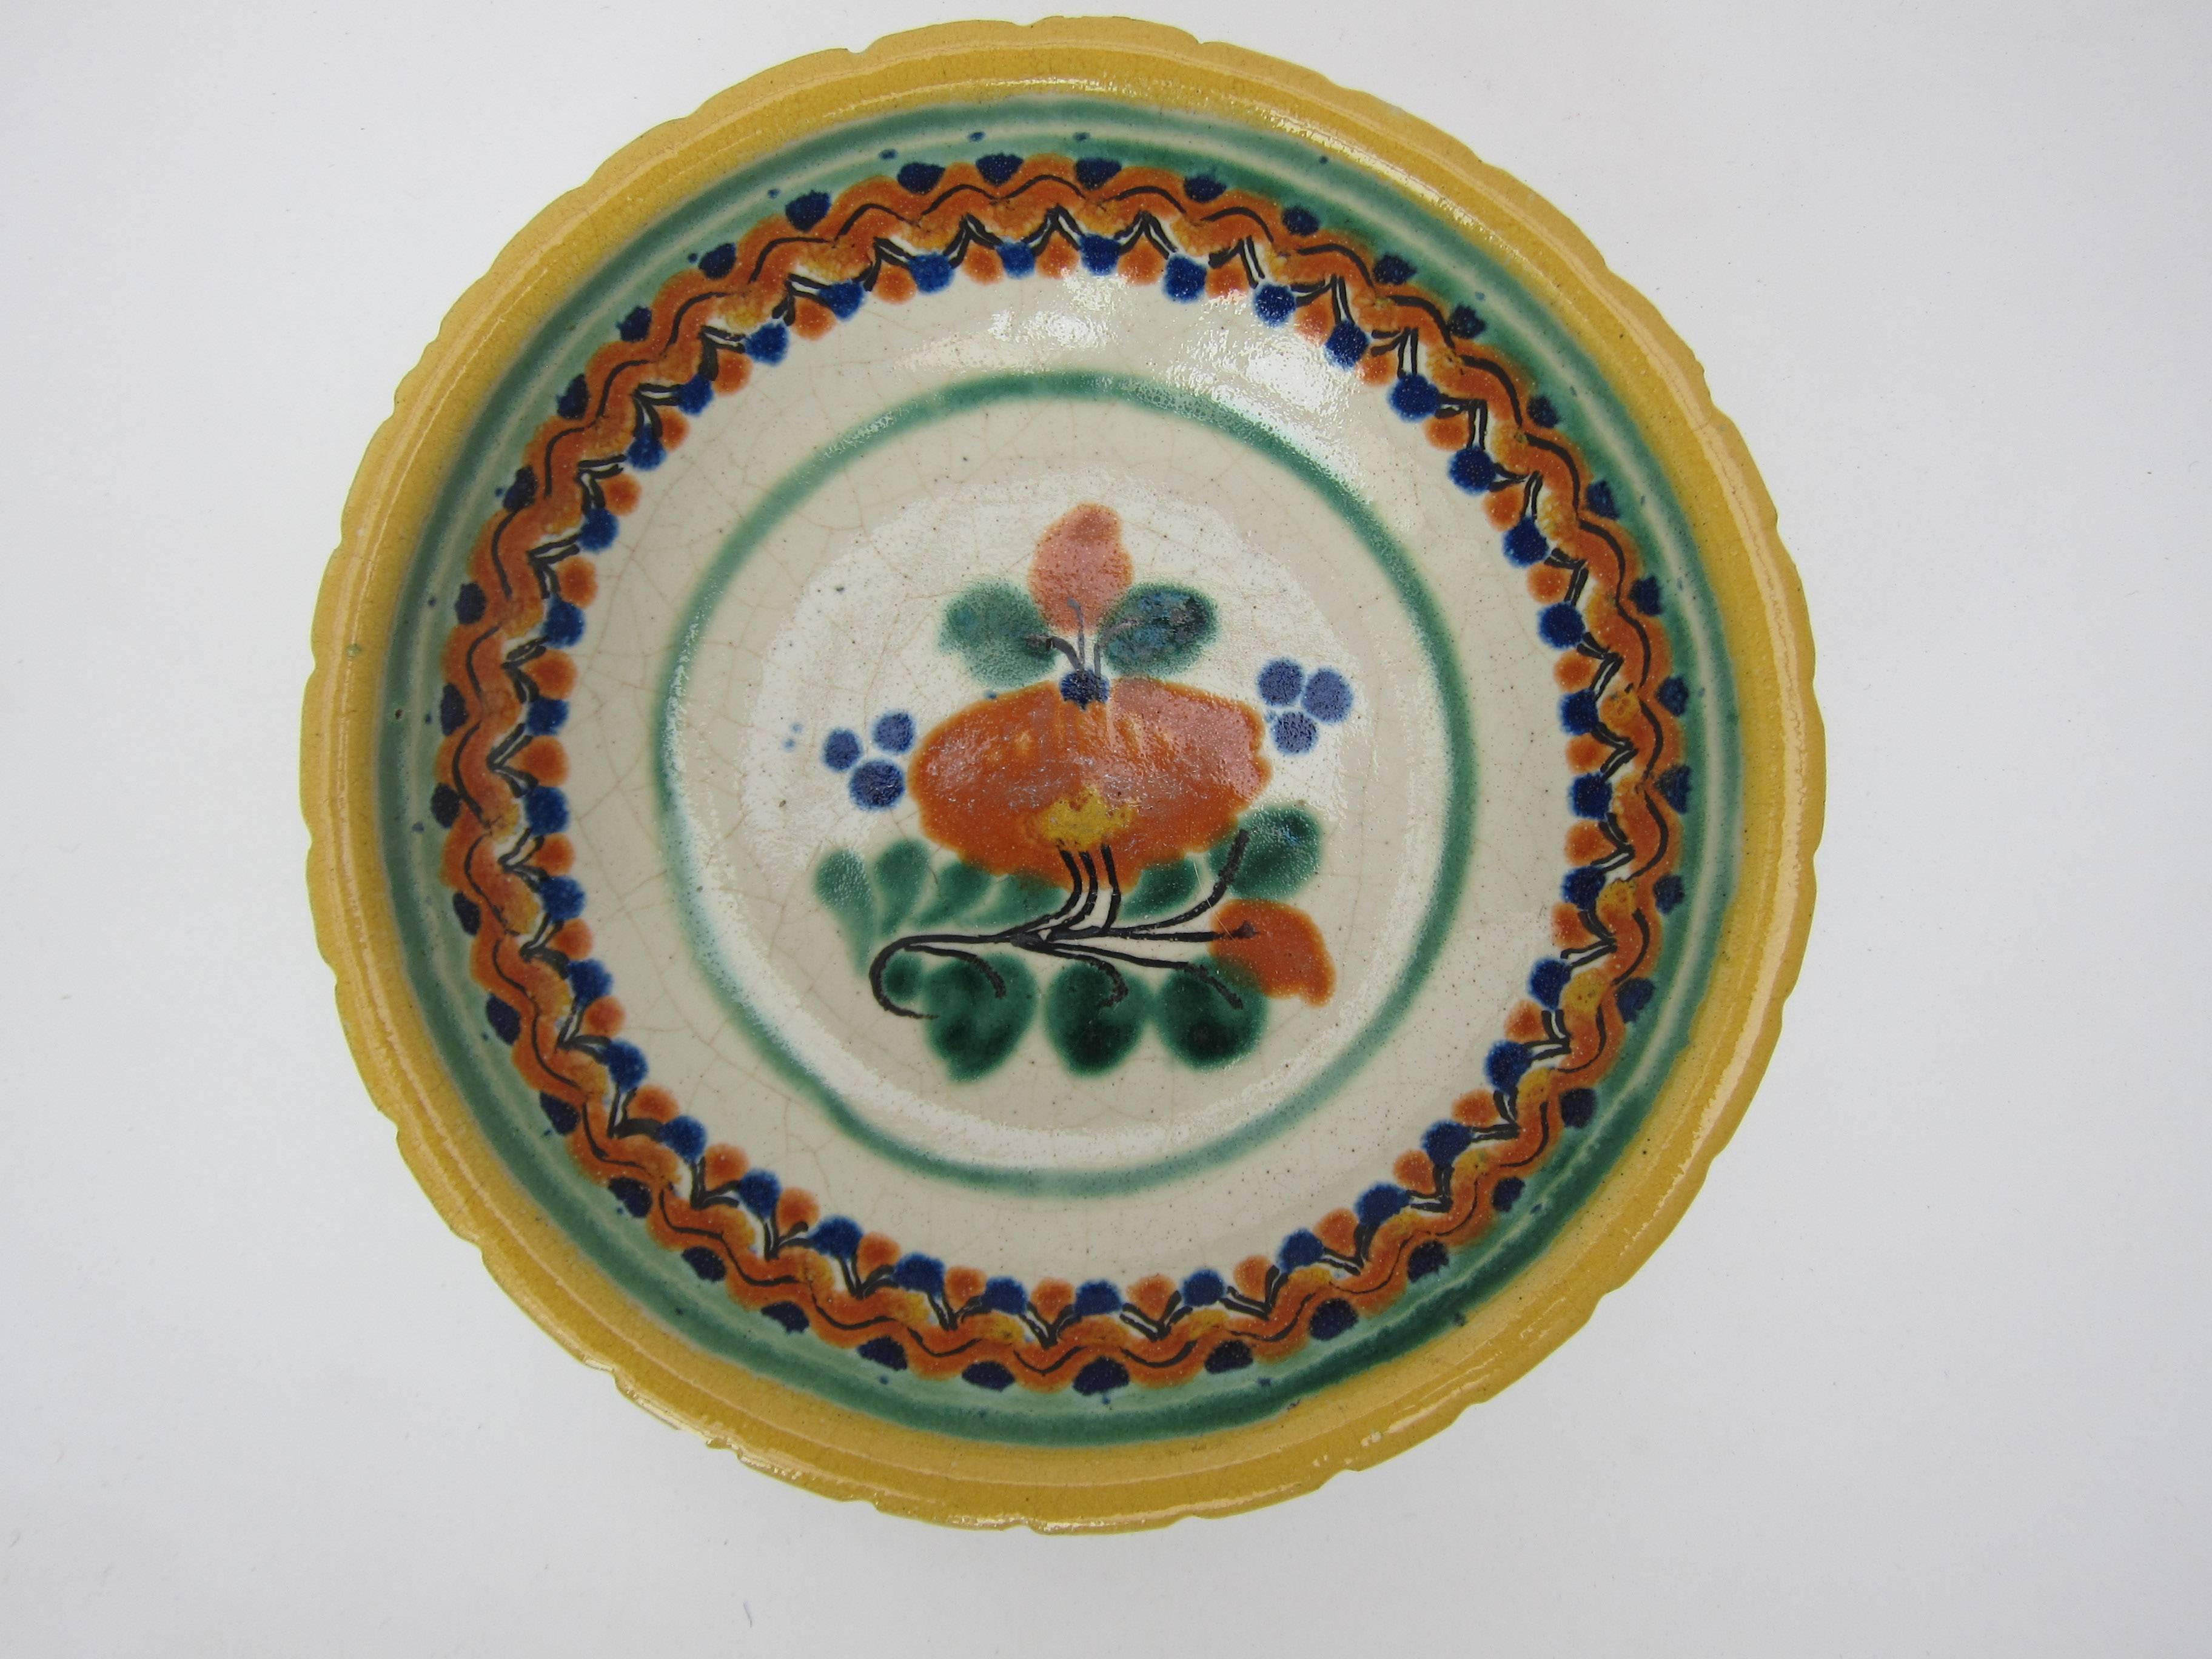 A charming variety of household bowls from Puebla and Oaxaca, dating from the 1960s and the decade after. The larger ones from Puebla are characteristically decorated with flowers and foliates and the bowls from Oaxaca, with their strong brush